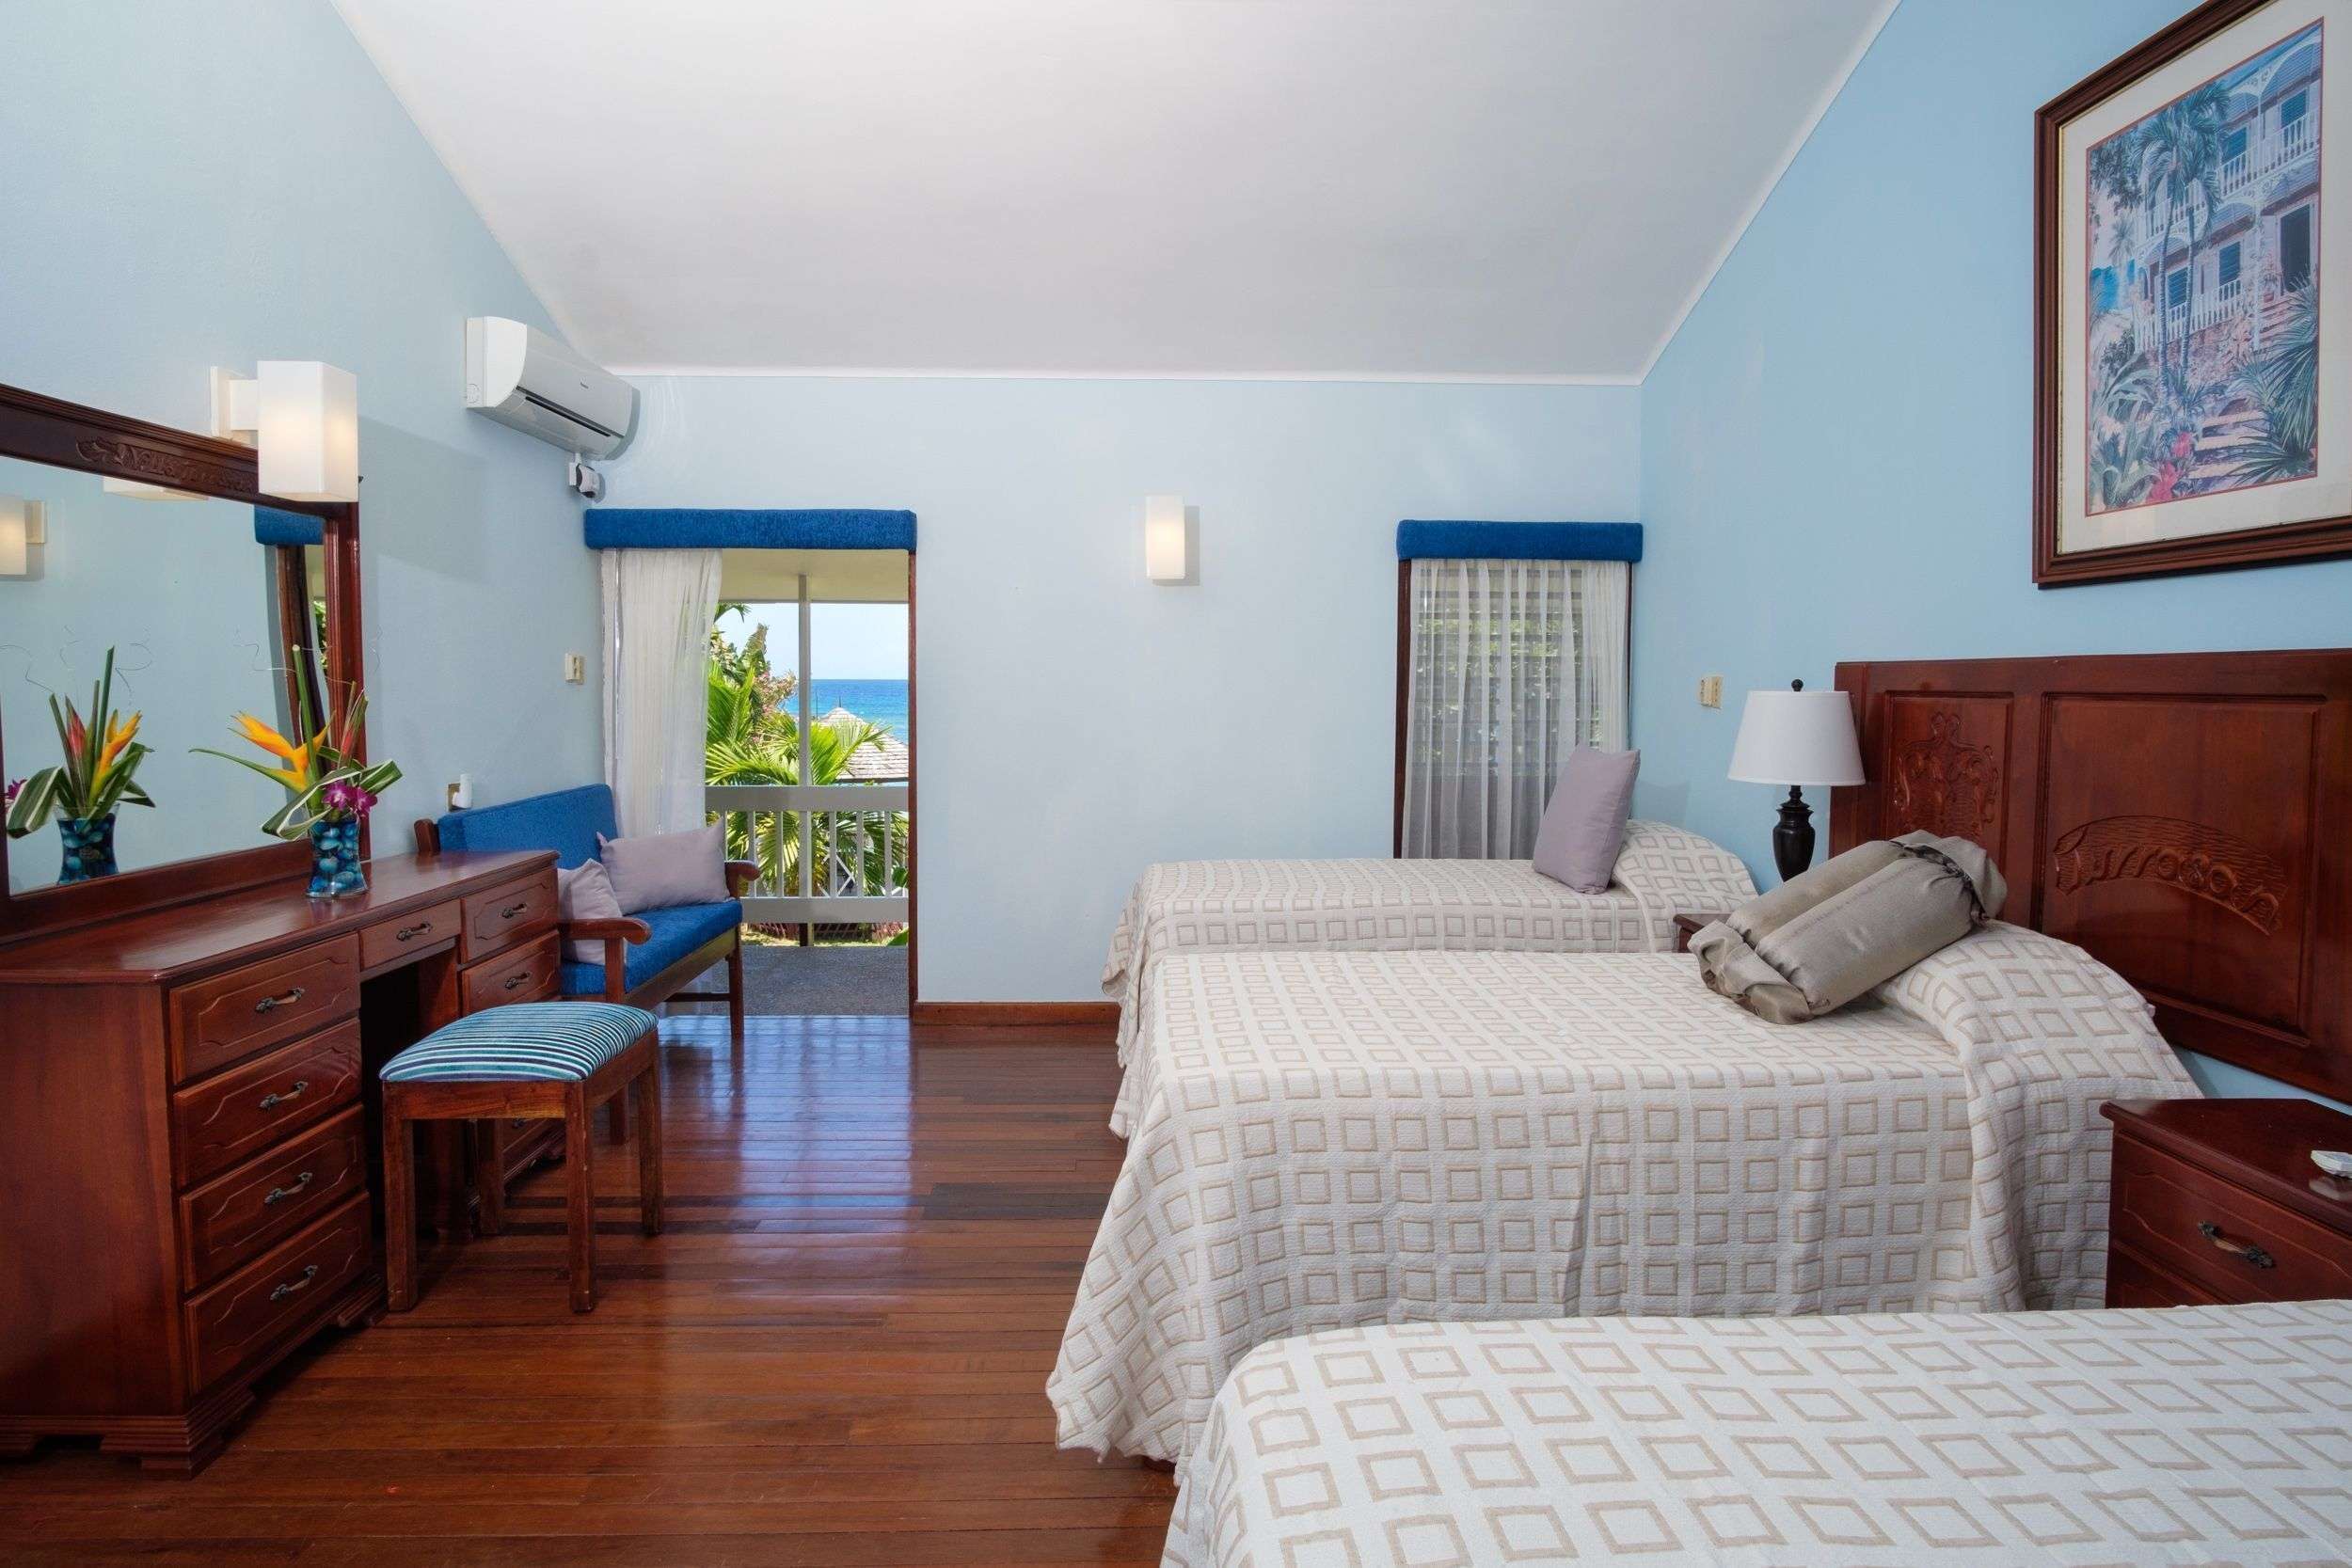 Bedroom 3 - Negril Converted into a triple bedded room.